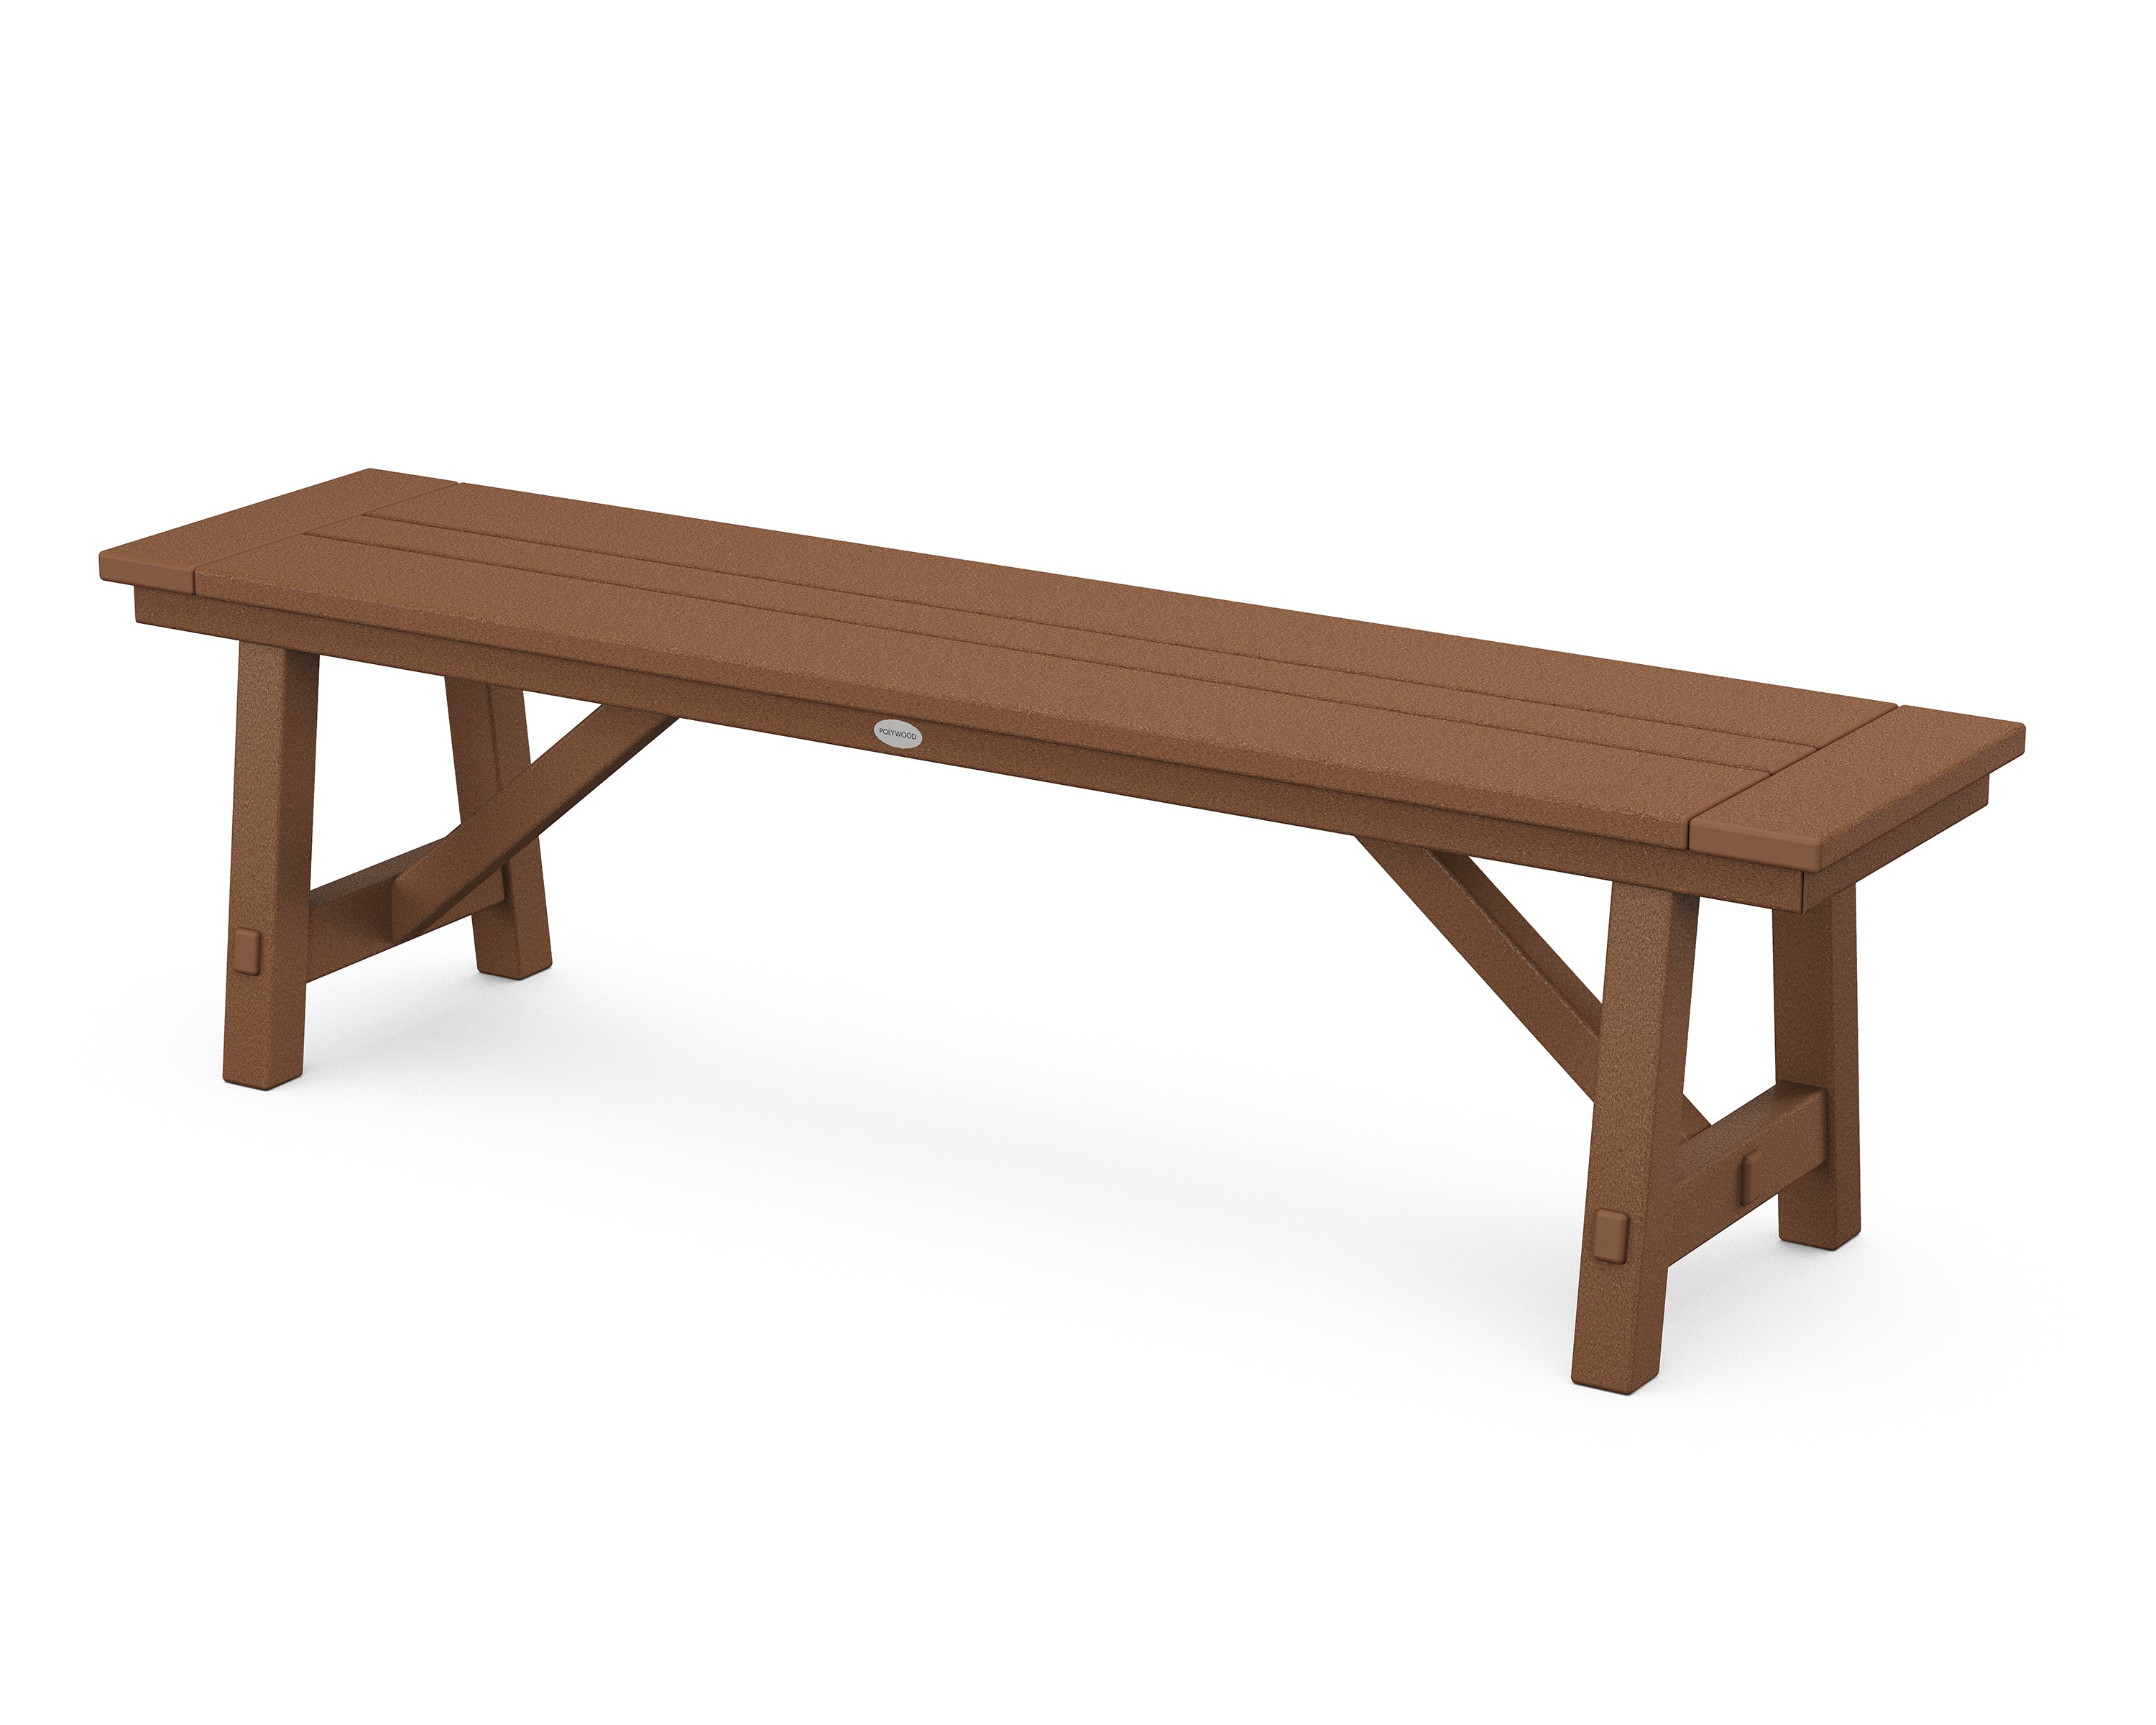 POLYWOOD® Rustic Farmhouse 60" Backless Bench in Teak